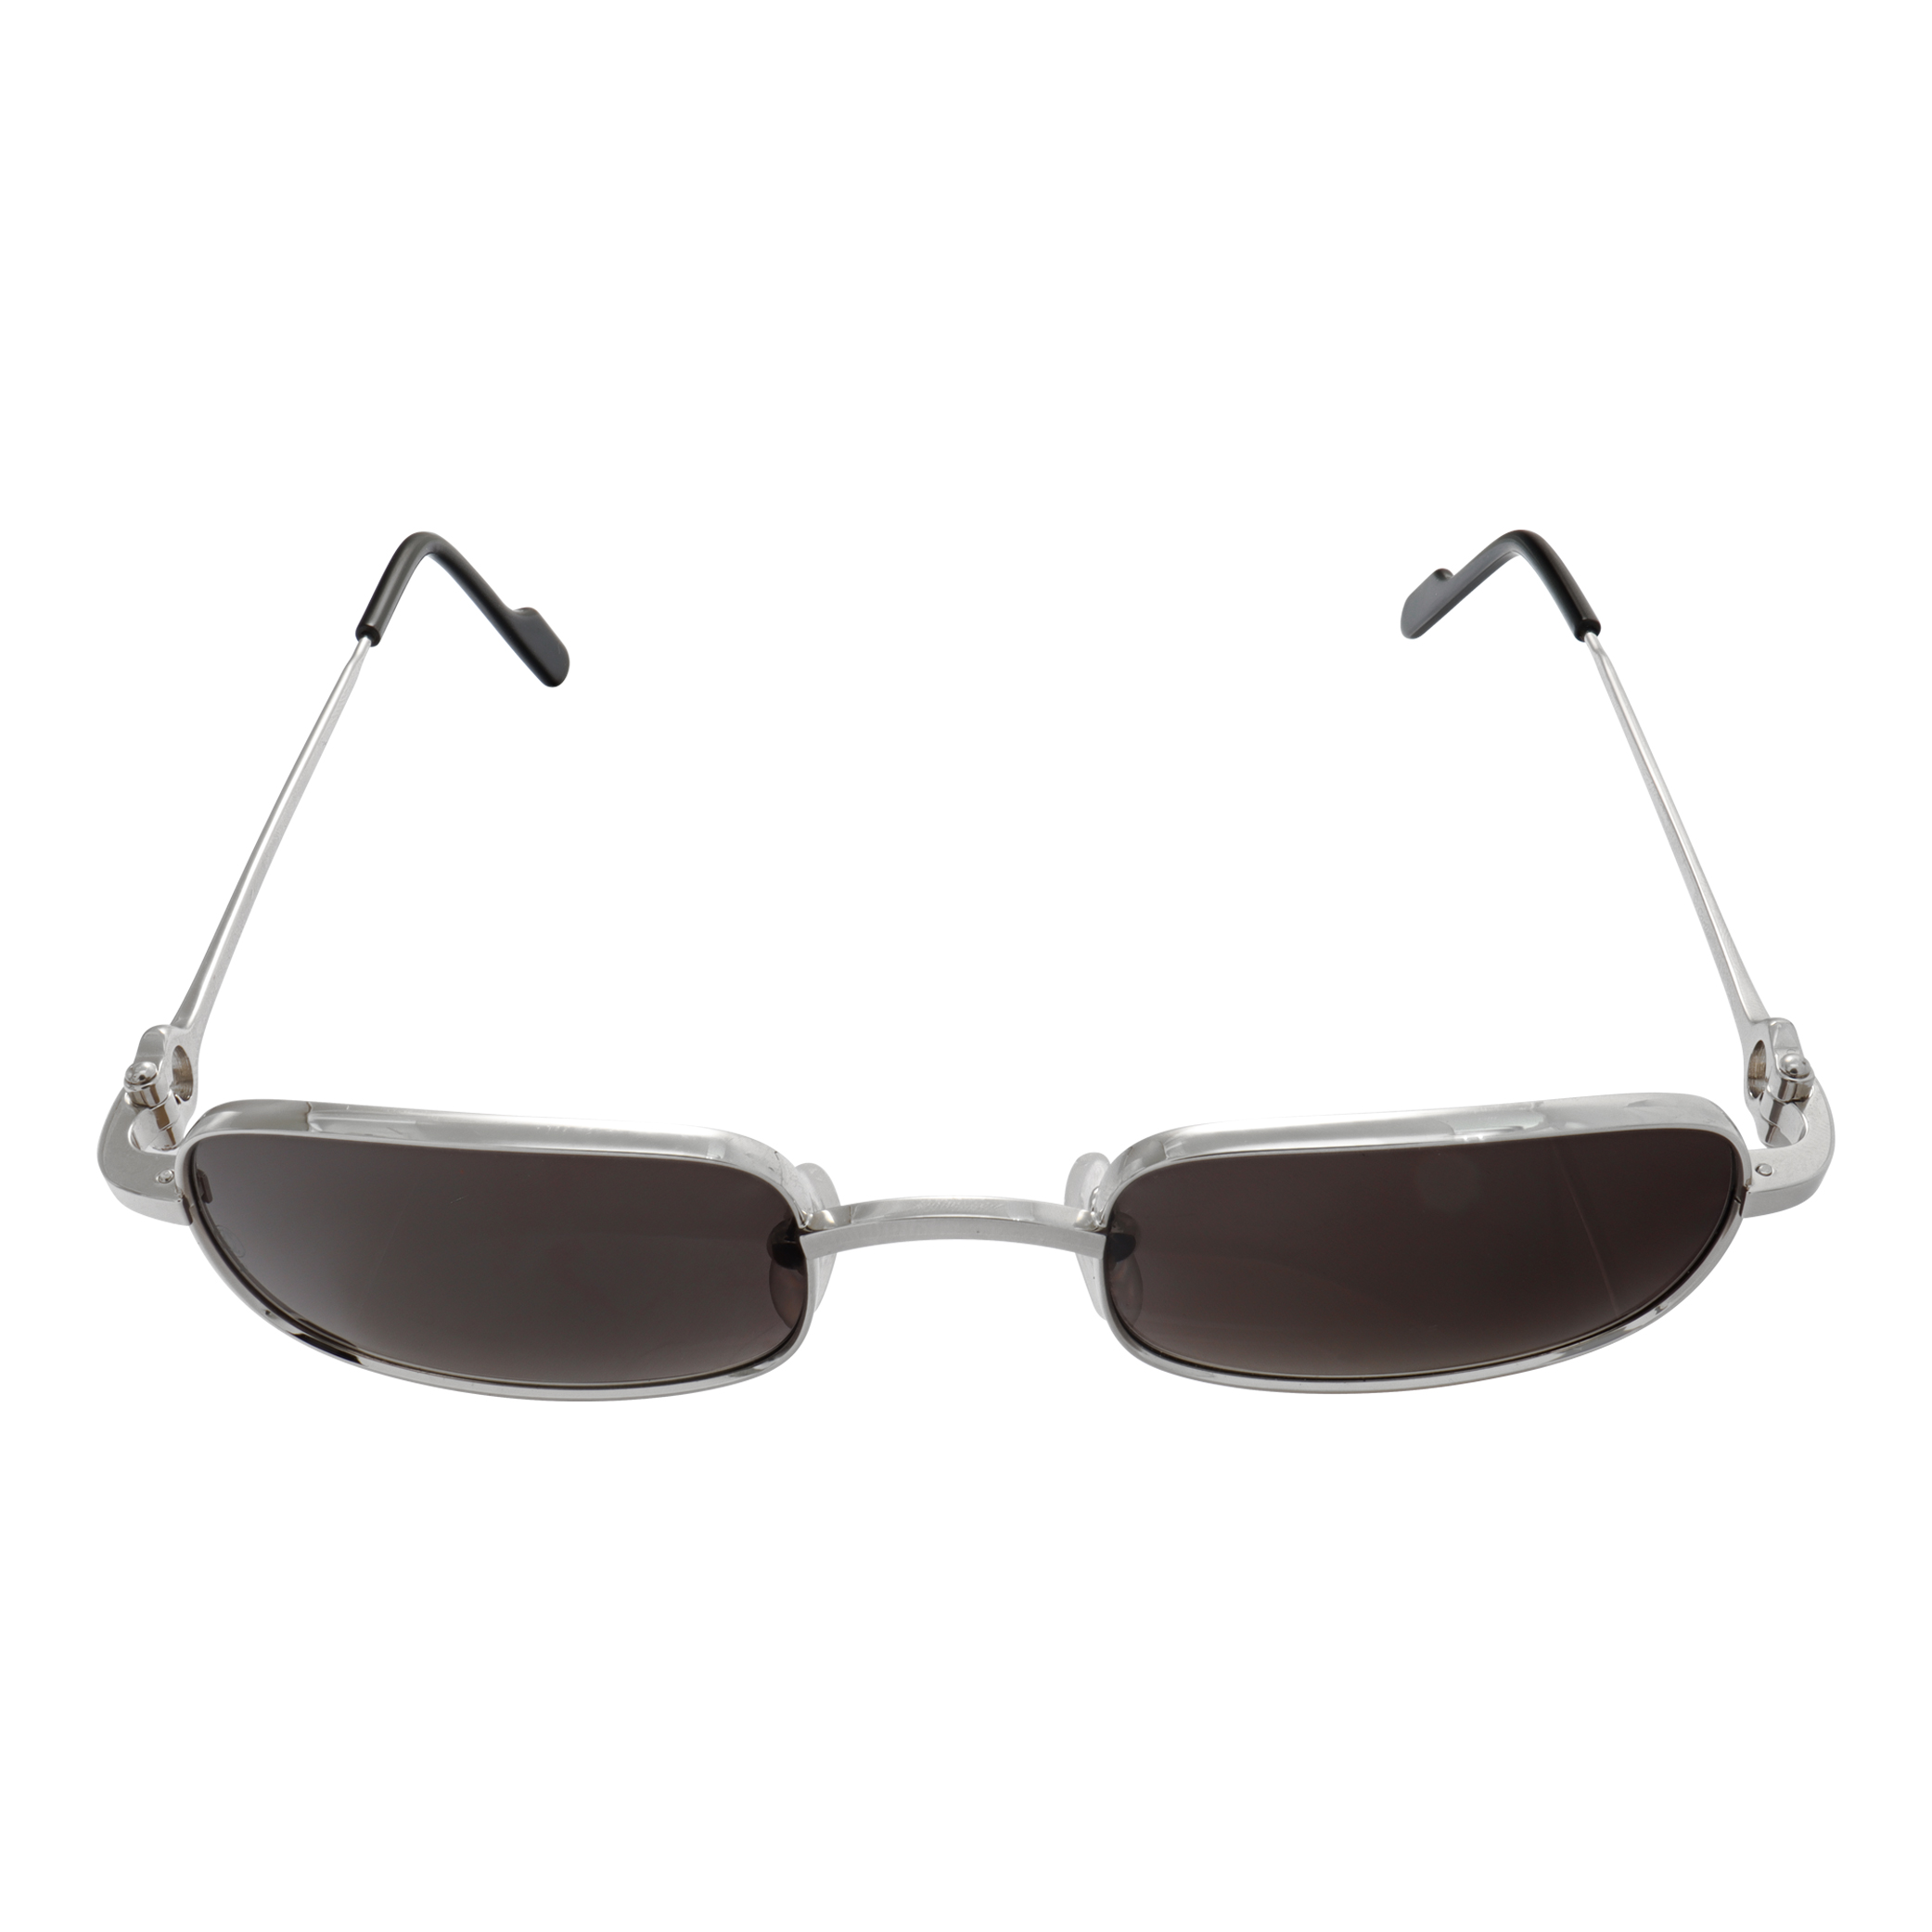 Cartier Panthere de Cartier Sunglasses in stainless steel